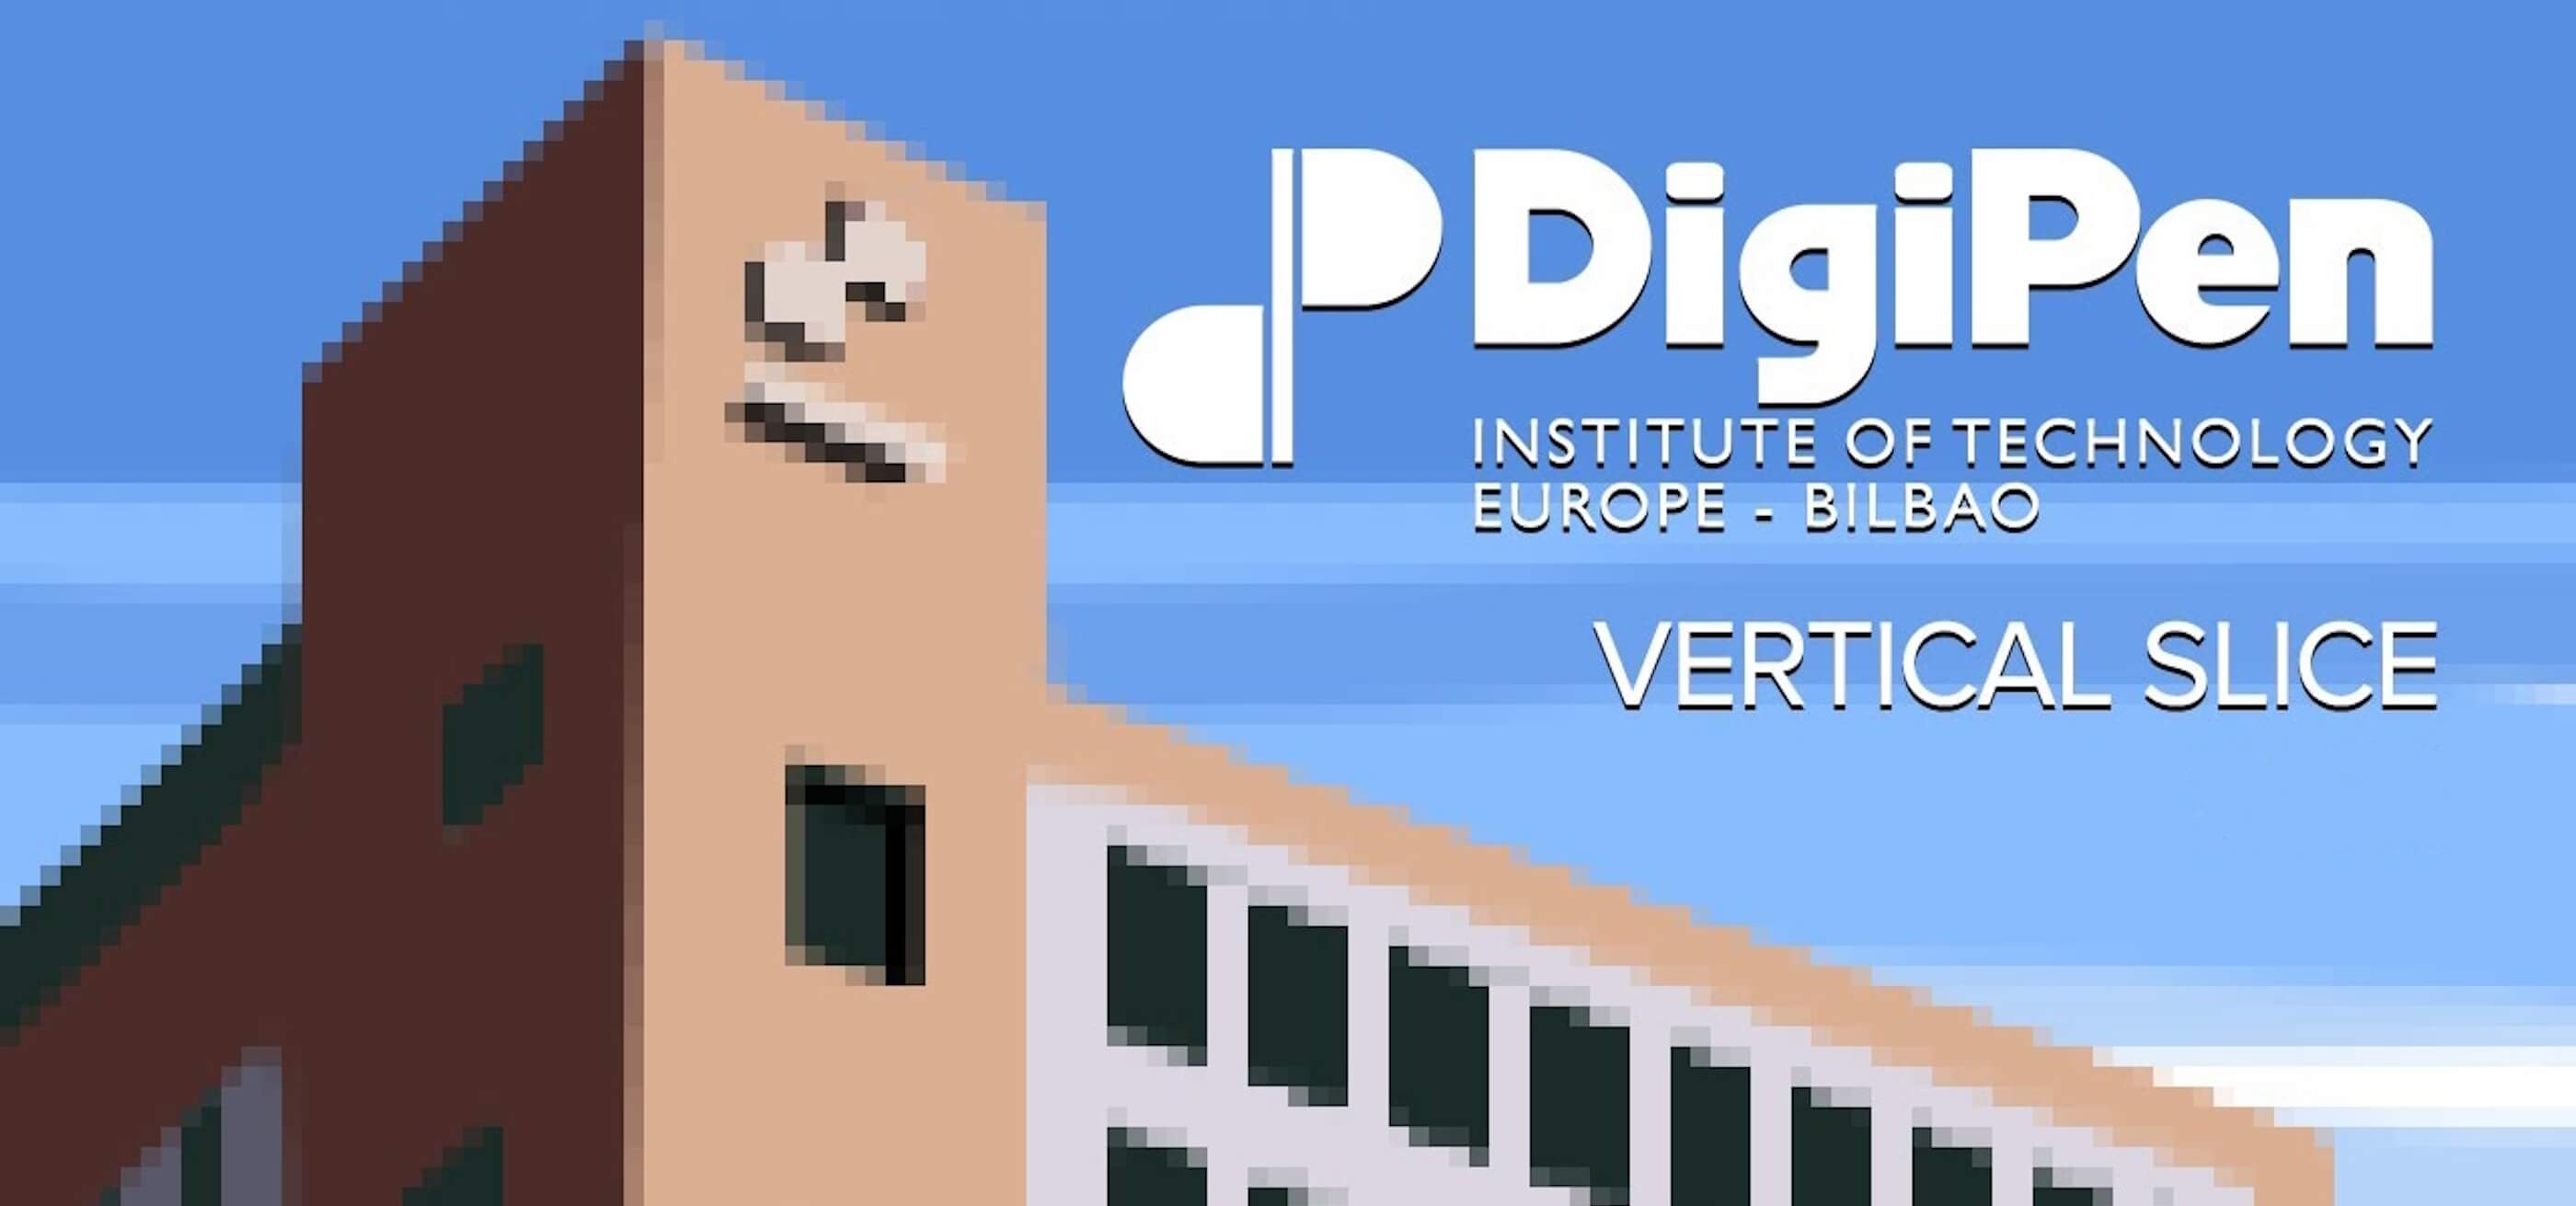 DigiPen Europe-Bilbao campus reimagined in charming pixel art form